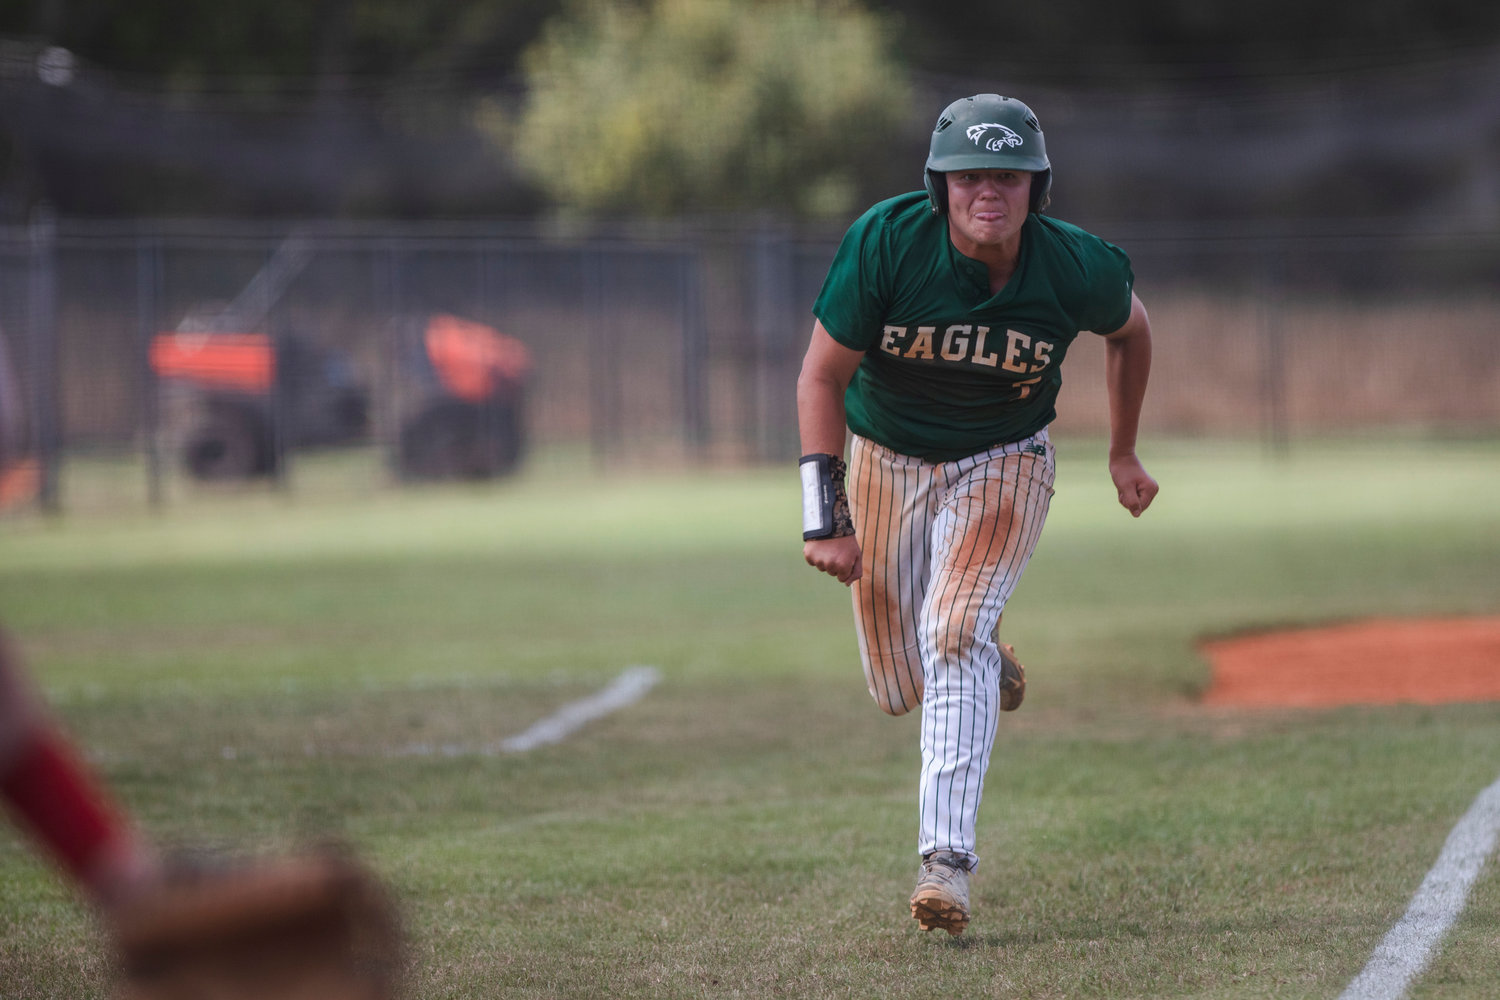 Bayshore Christian freshman Cole Dean sprints home to score a run in the state quarterfinal series against the Berry Wildcats at Coastal Church in Daphne May 5. Dean was one of four Eagles named first-team all-stars by the Mobile Baseball Connection.